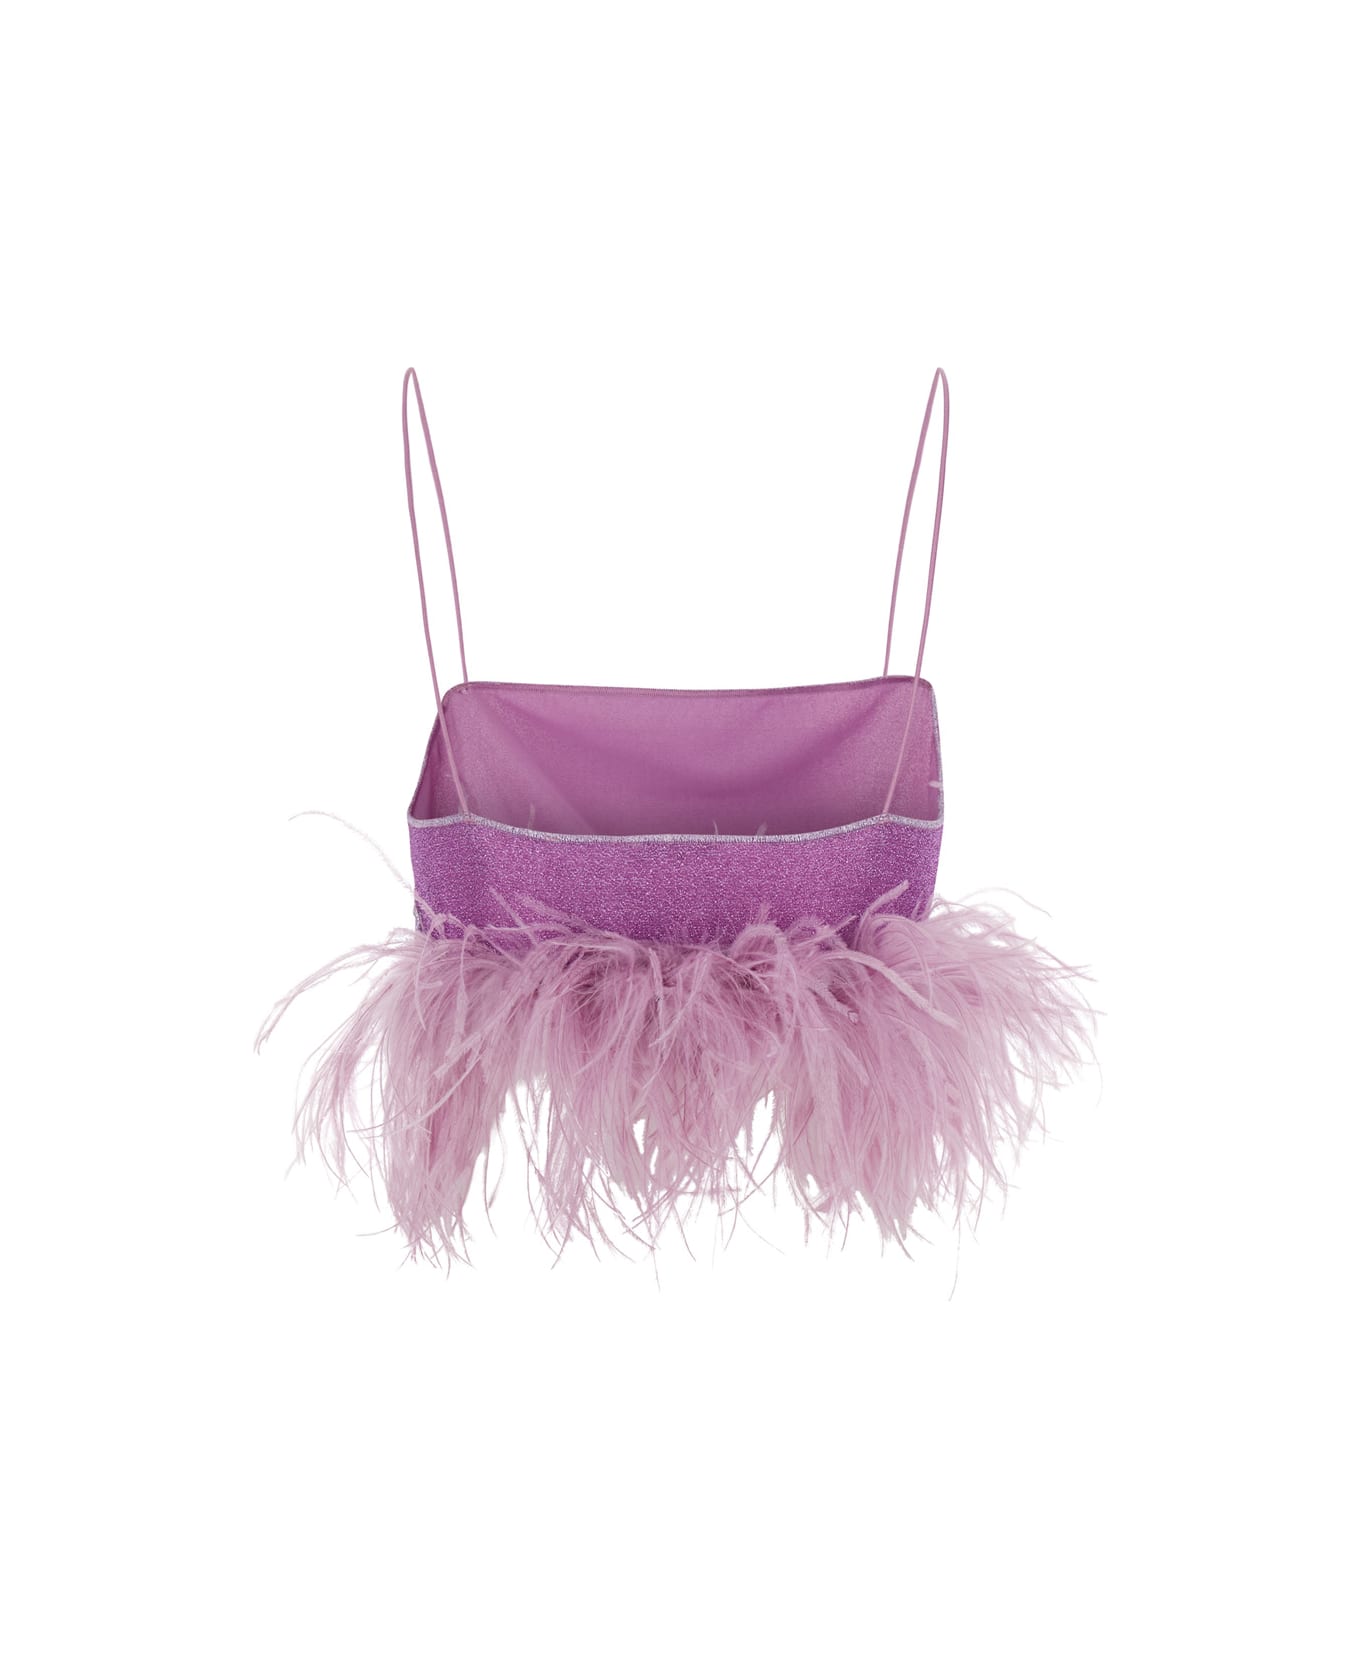 Oseree 'lumière Plumage' Violet Top With Feathers Trim In Lurex Woman - Pink トップス